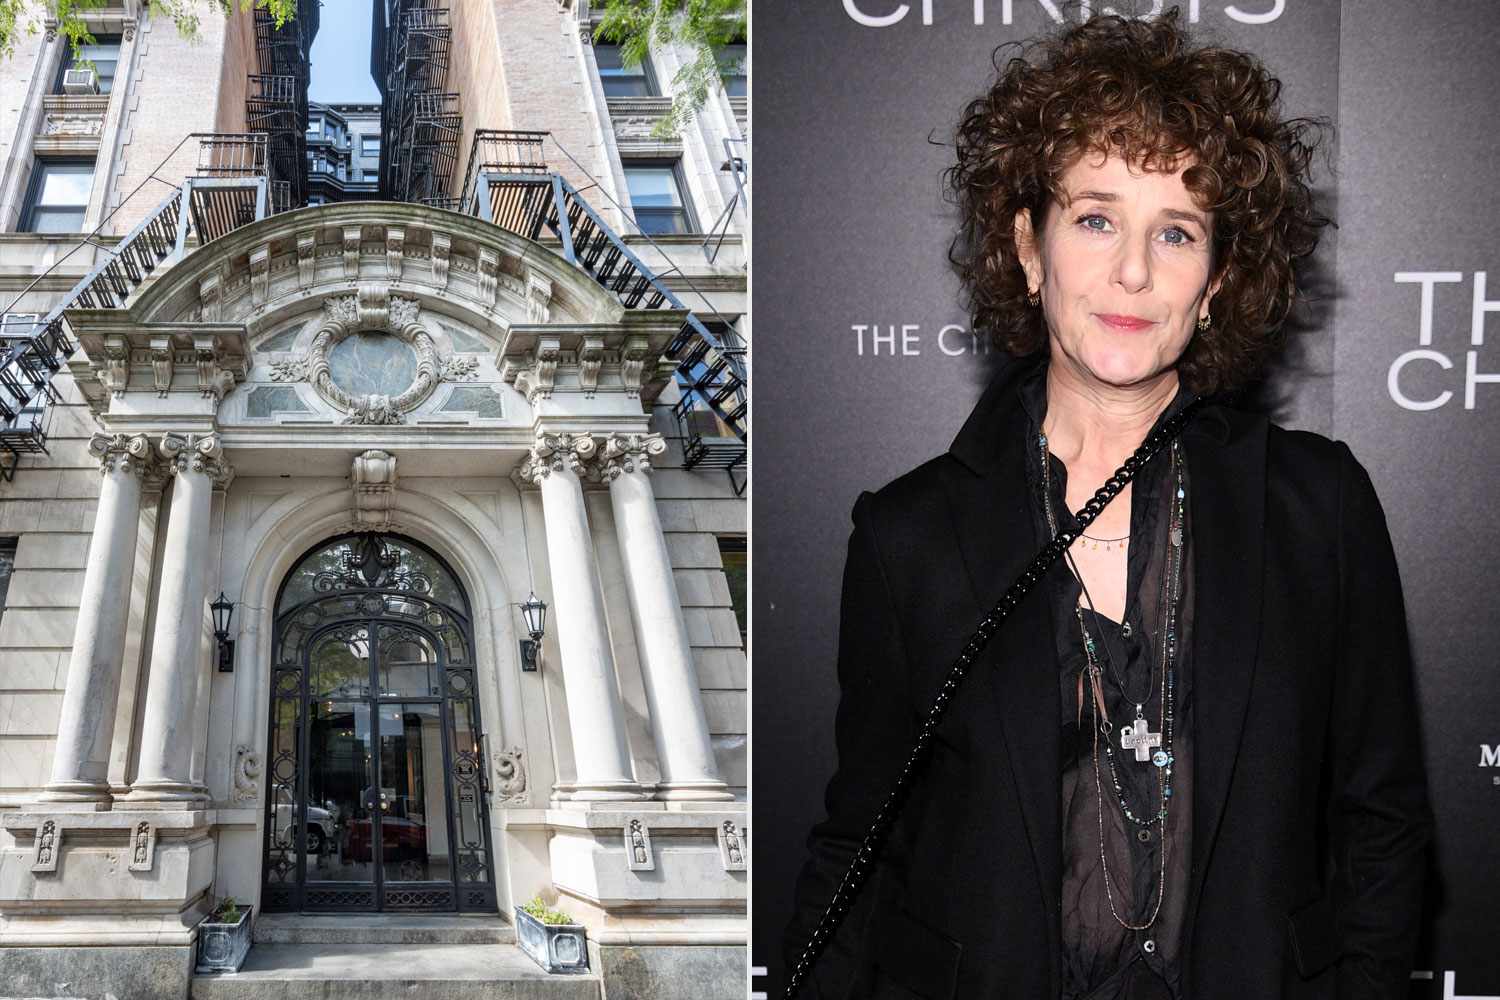 Debra Winger's NYC apartment. Credit: Jonathan Nissenbaum.; NEW YORK, NEW YORK - JANUARY 09: Debra Winger attends a screening of "Three Christs" hosted by IFC and the Cinema Society at Regal Essex Crossing on January 09, 2020 in New York City. (Photo by Dimitrios Kambouris/Getty Images)